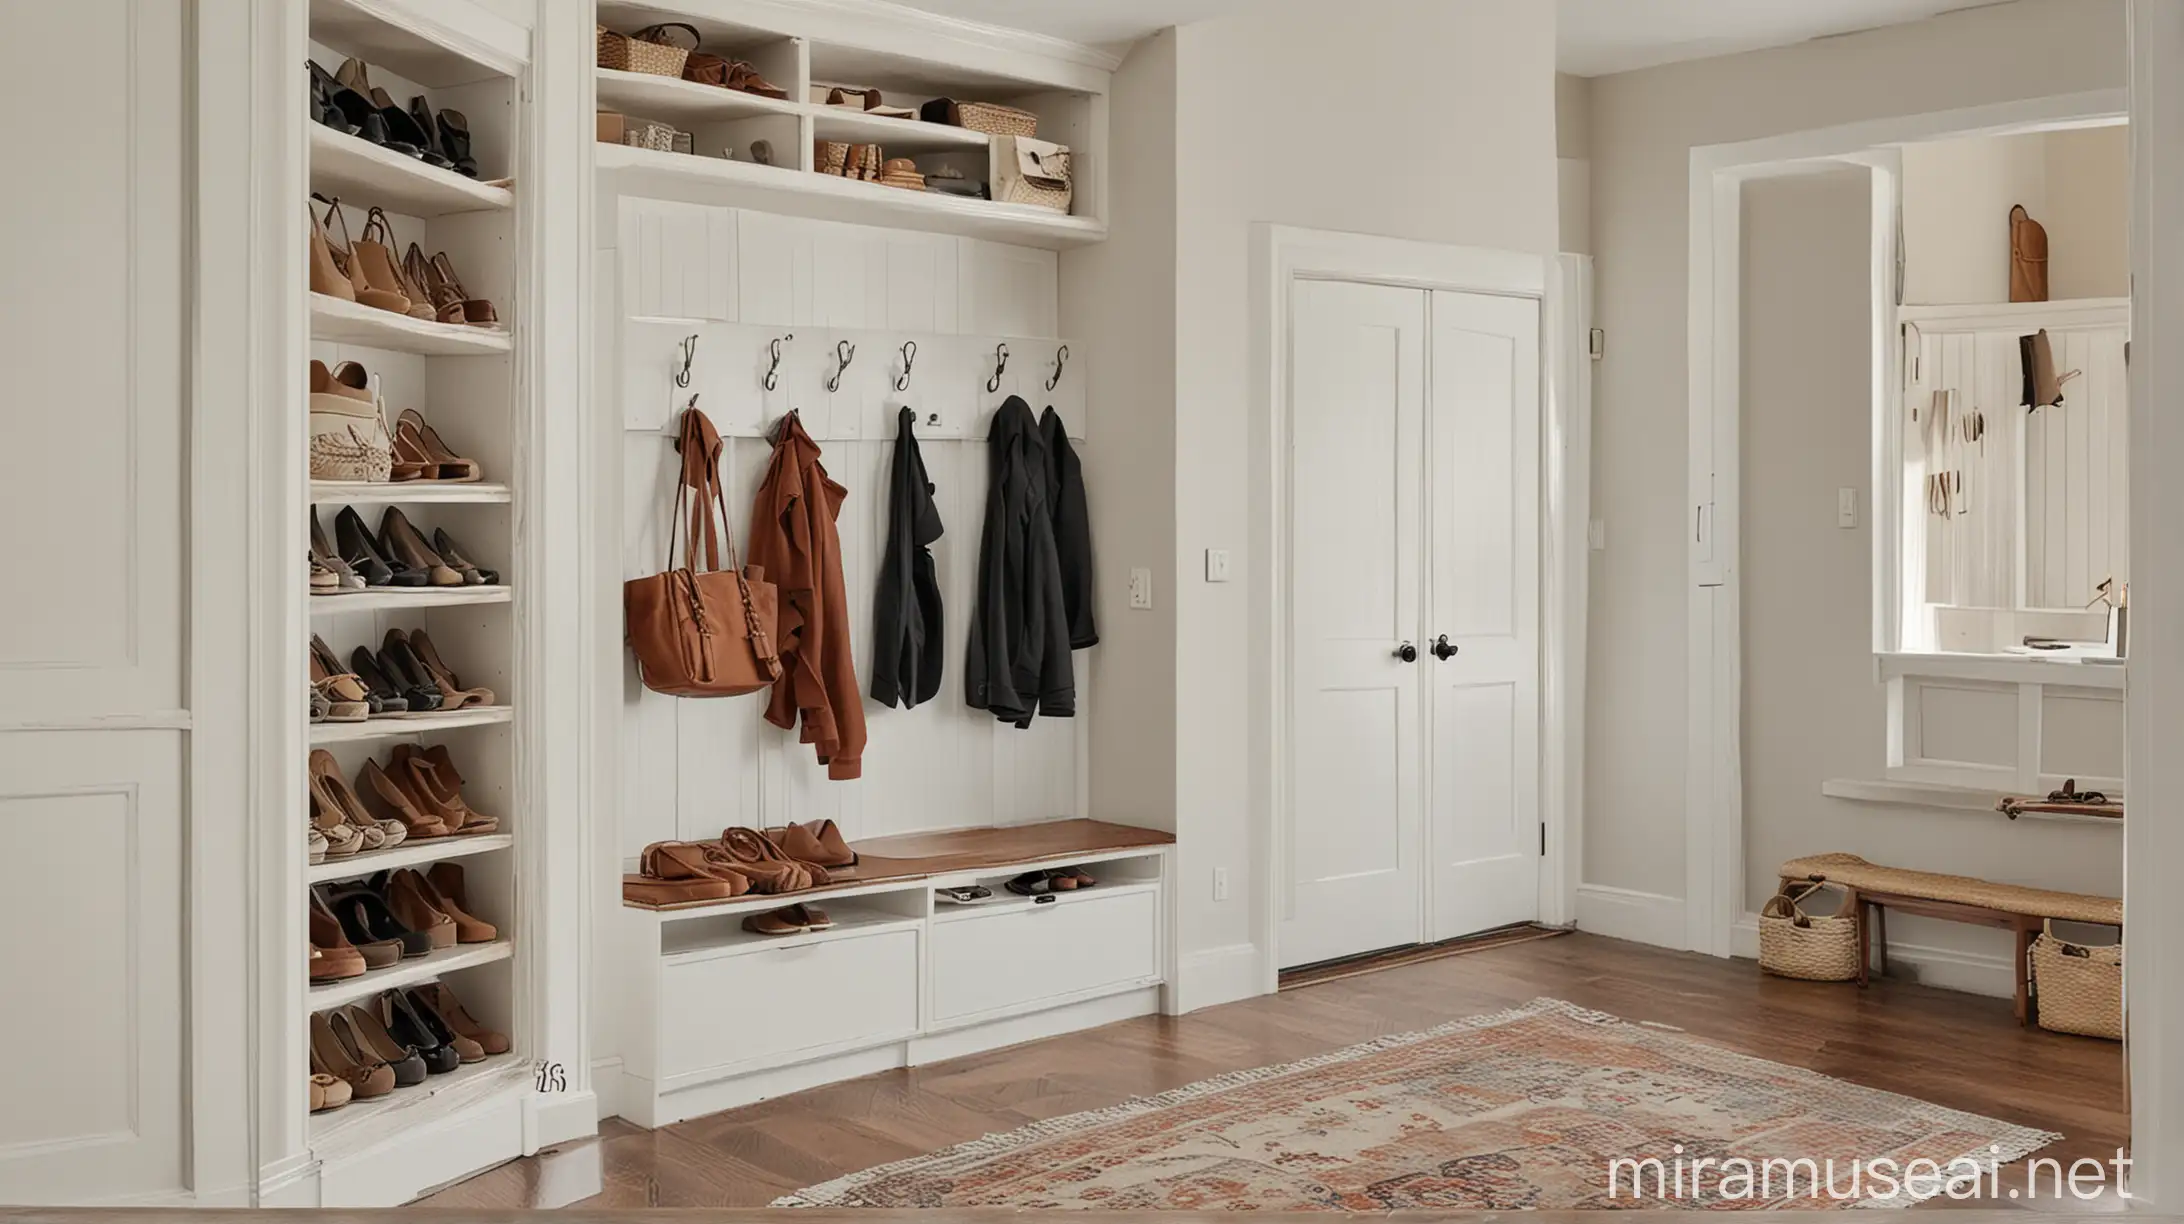 Functional Entryway with BuiltIn Storage for Shoes Coats and Bags